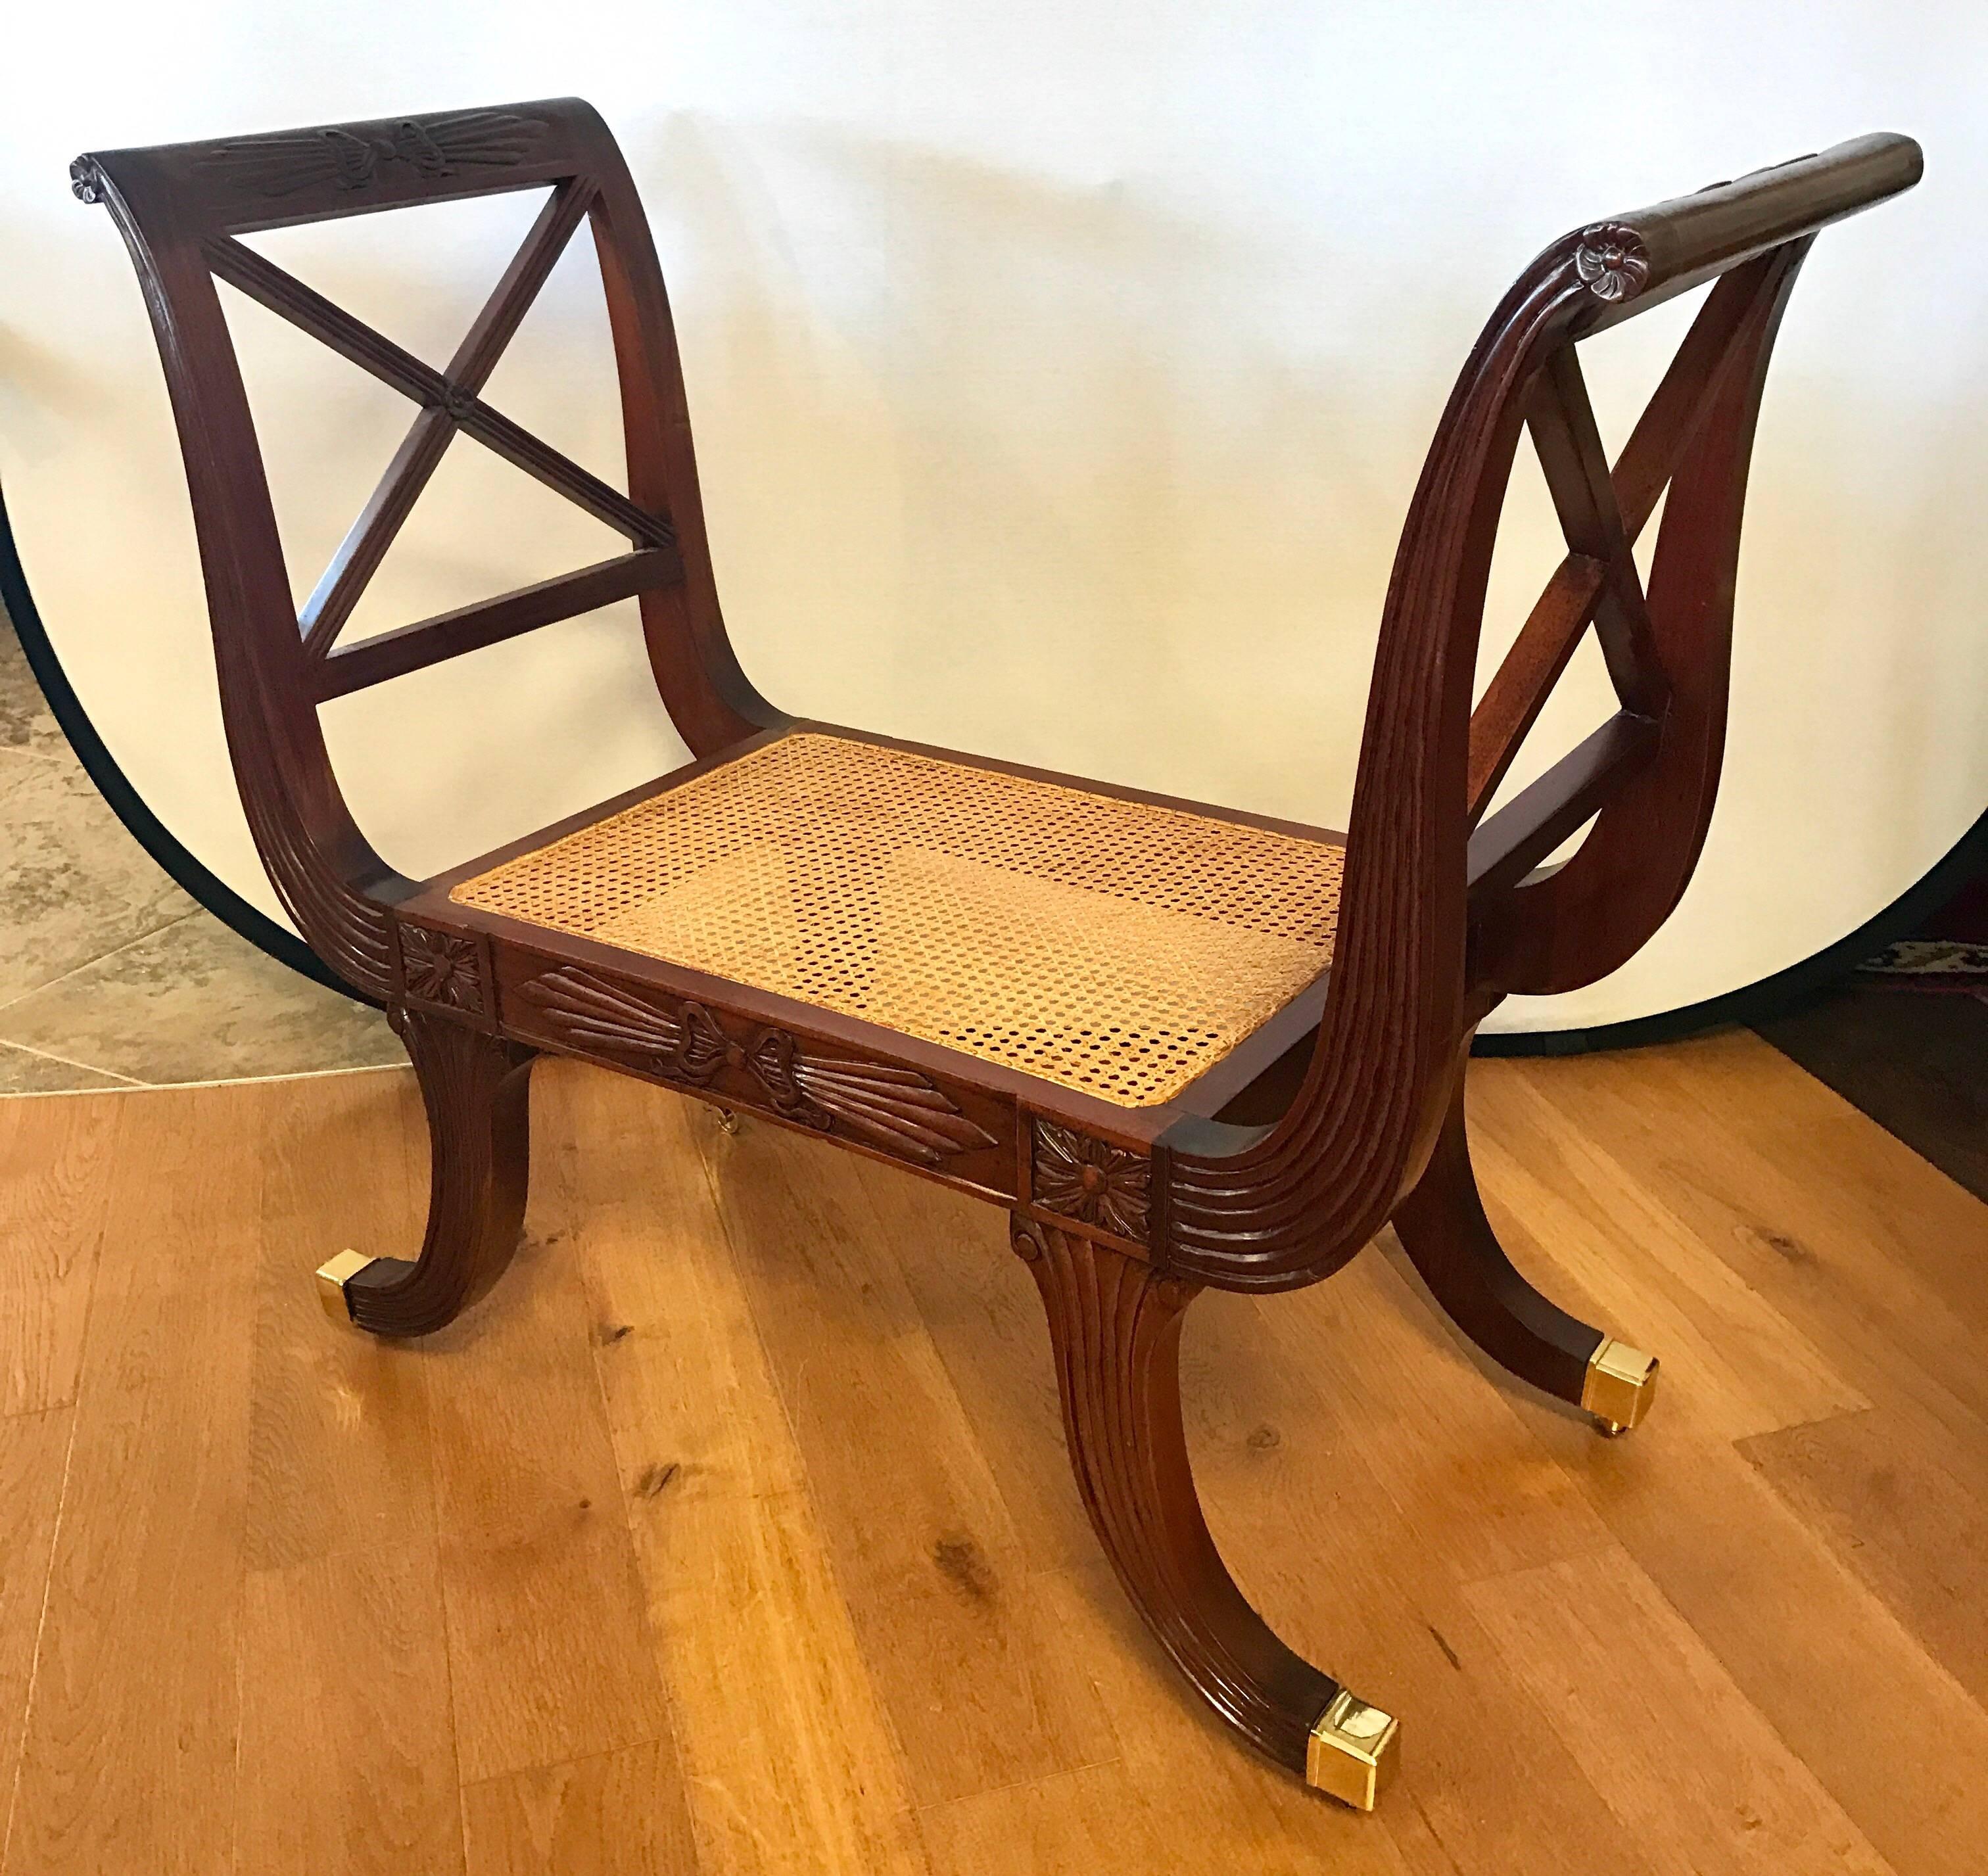 Stunning and rare set of neoclassical carved mahogany window benches with cane seats and brass castors. Measures: Seat height is 16.5 inches.
Gorgeous ribbon carvings throughout.